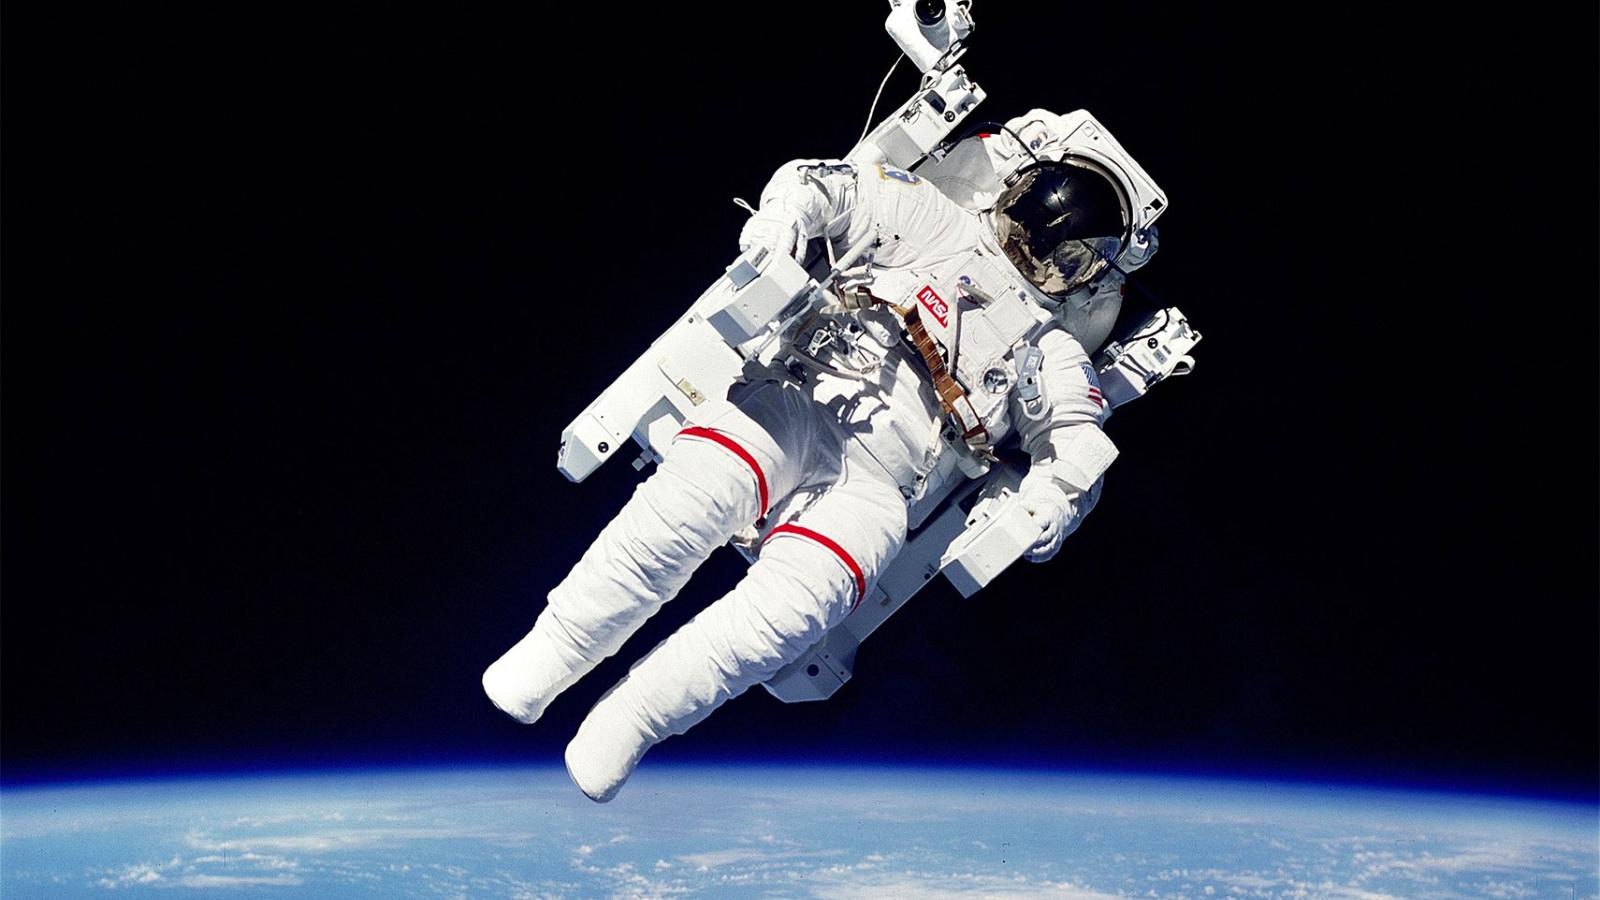 An astronaut in full space suit floating in space with the earth below